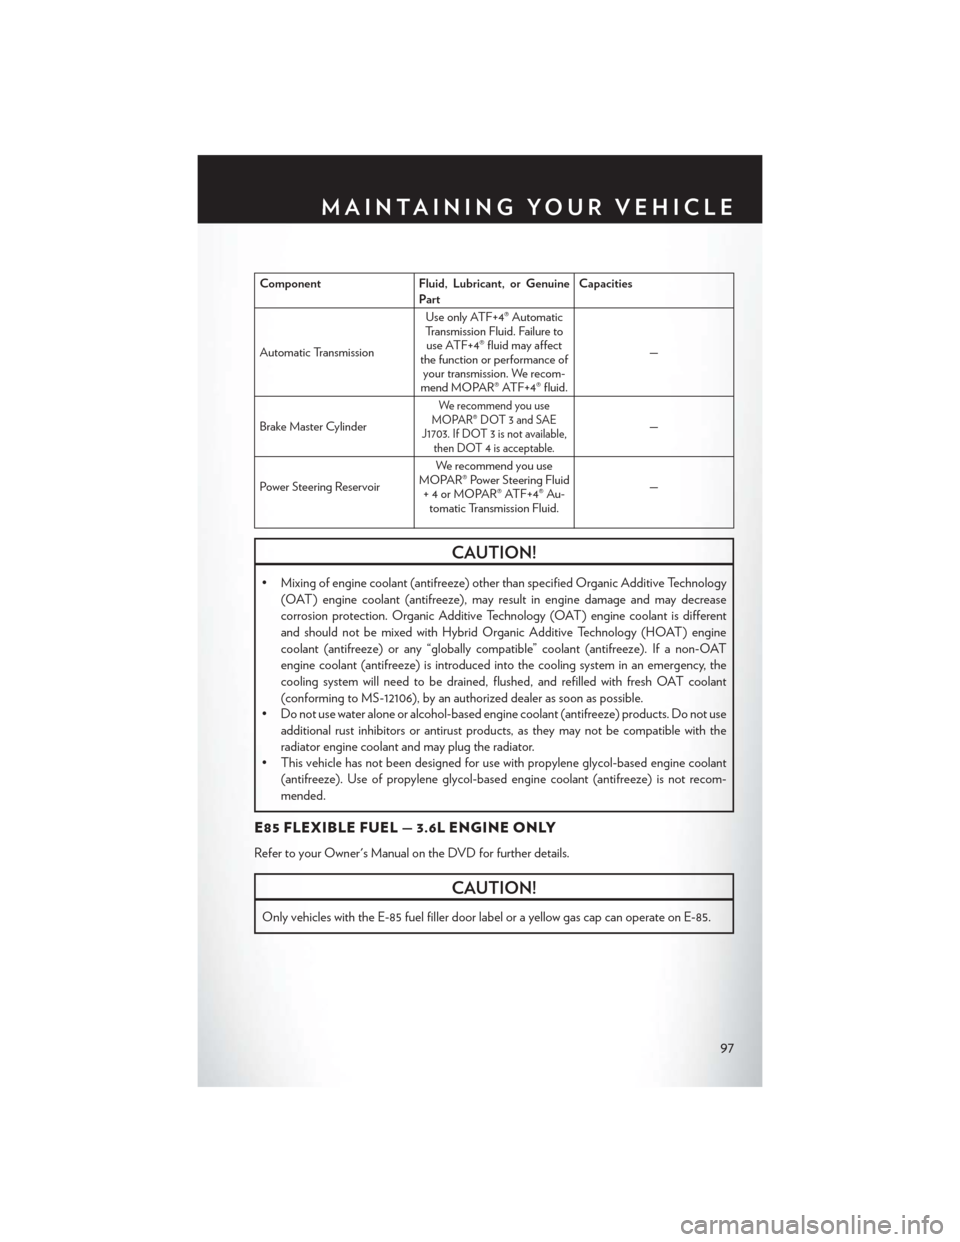 CHRYSLER 200 CONVERTIBLE 2014 1.G User Guide ComponentFluid, Lubricant, or Genuine
Part Capacities
Automatic Transmission Use only ATF+4® Automatic
Transmission Fluid. Failure to use ATF+4® fluid may affect
the function or performance of your 